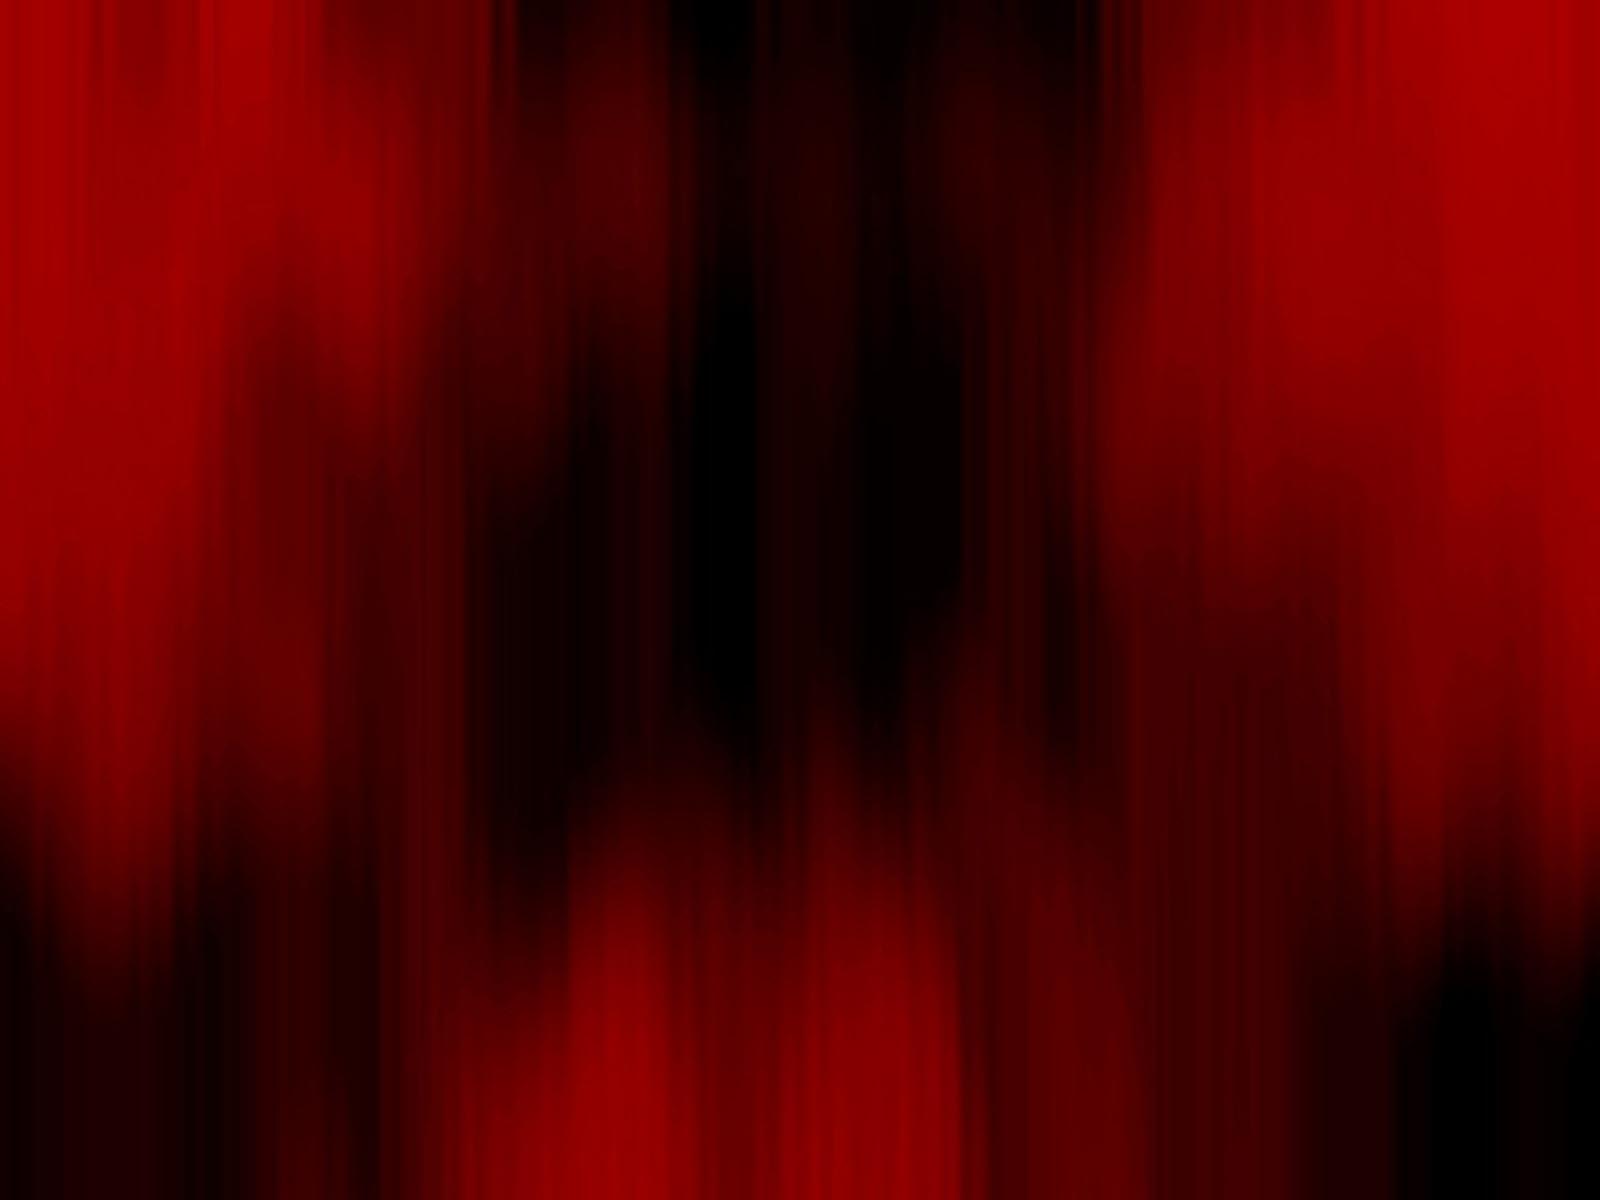 The Dark Red Wallpaper 41443 High Resolution. download all free jpeg